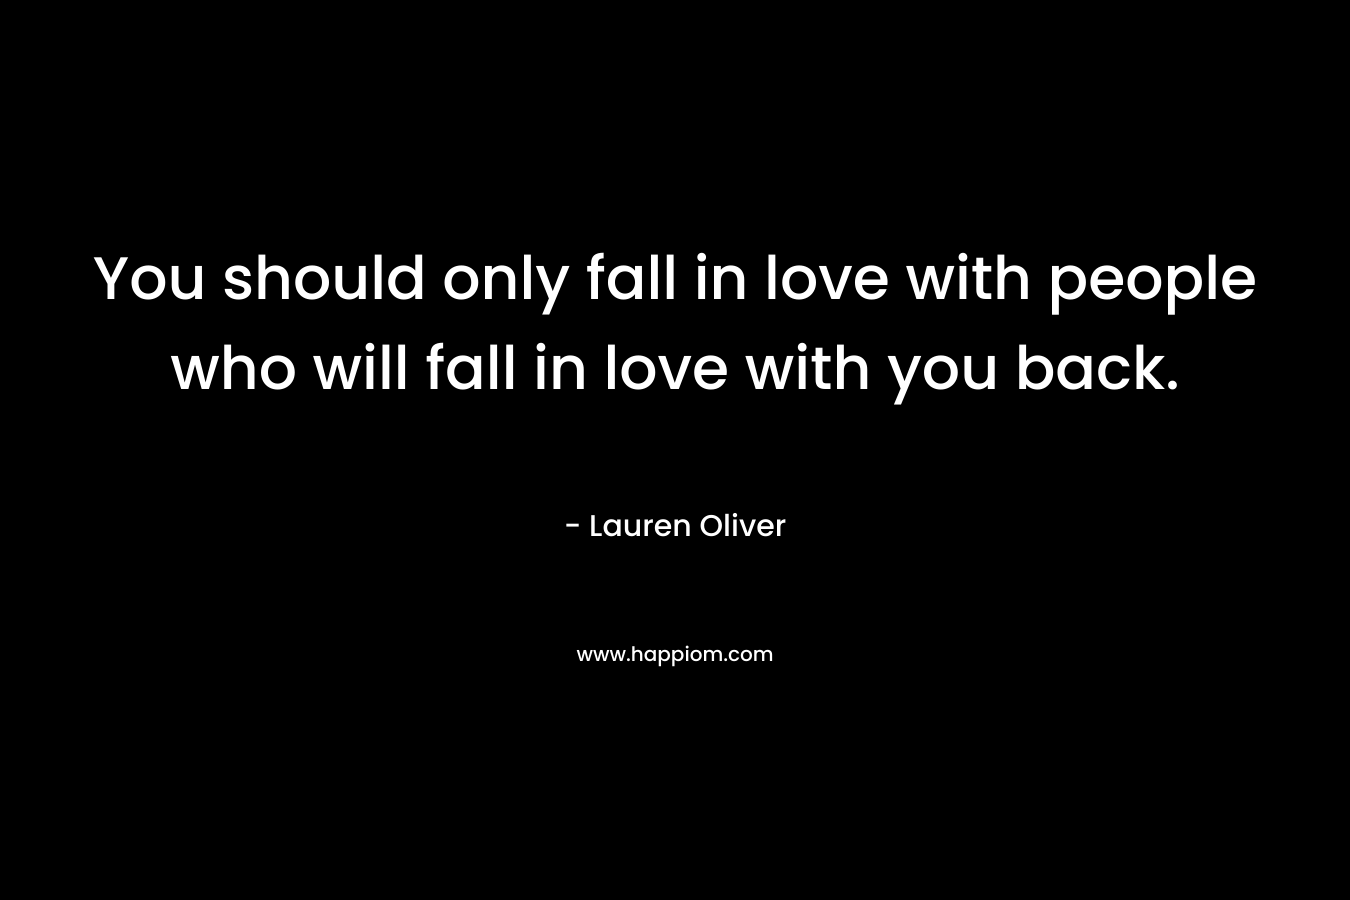 You should only fall in love with people who will fall in love with you back.